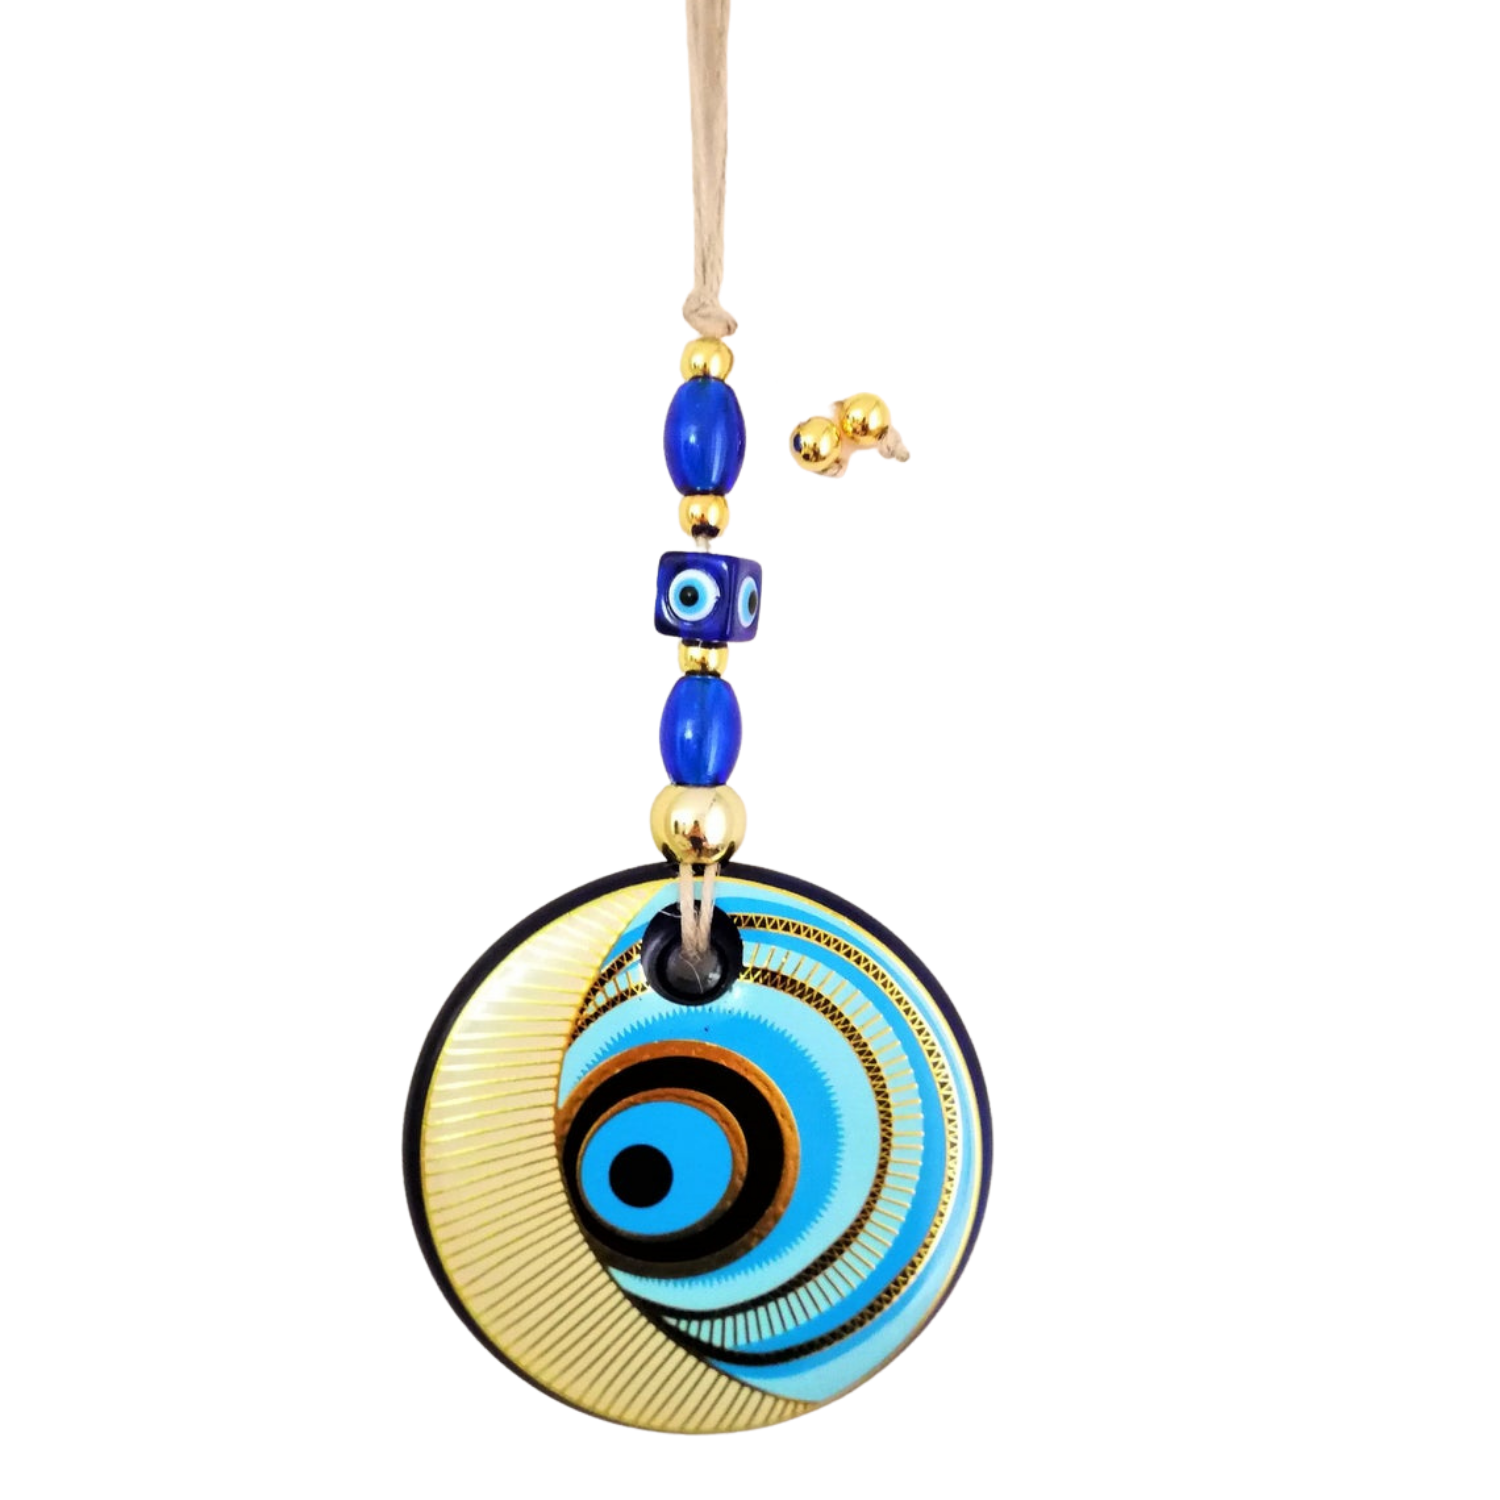 Handmade Evil Eye Glass Wall Hanging Gold Detail Design with Macrame Home Decor Accents Ornament for Christmas Home Protection Charm